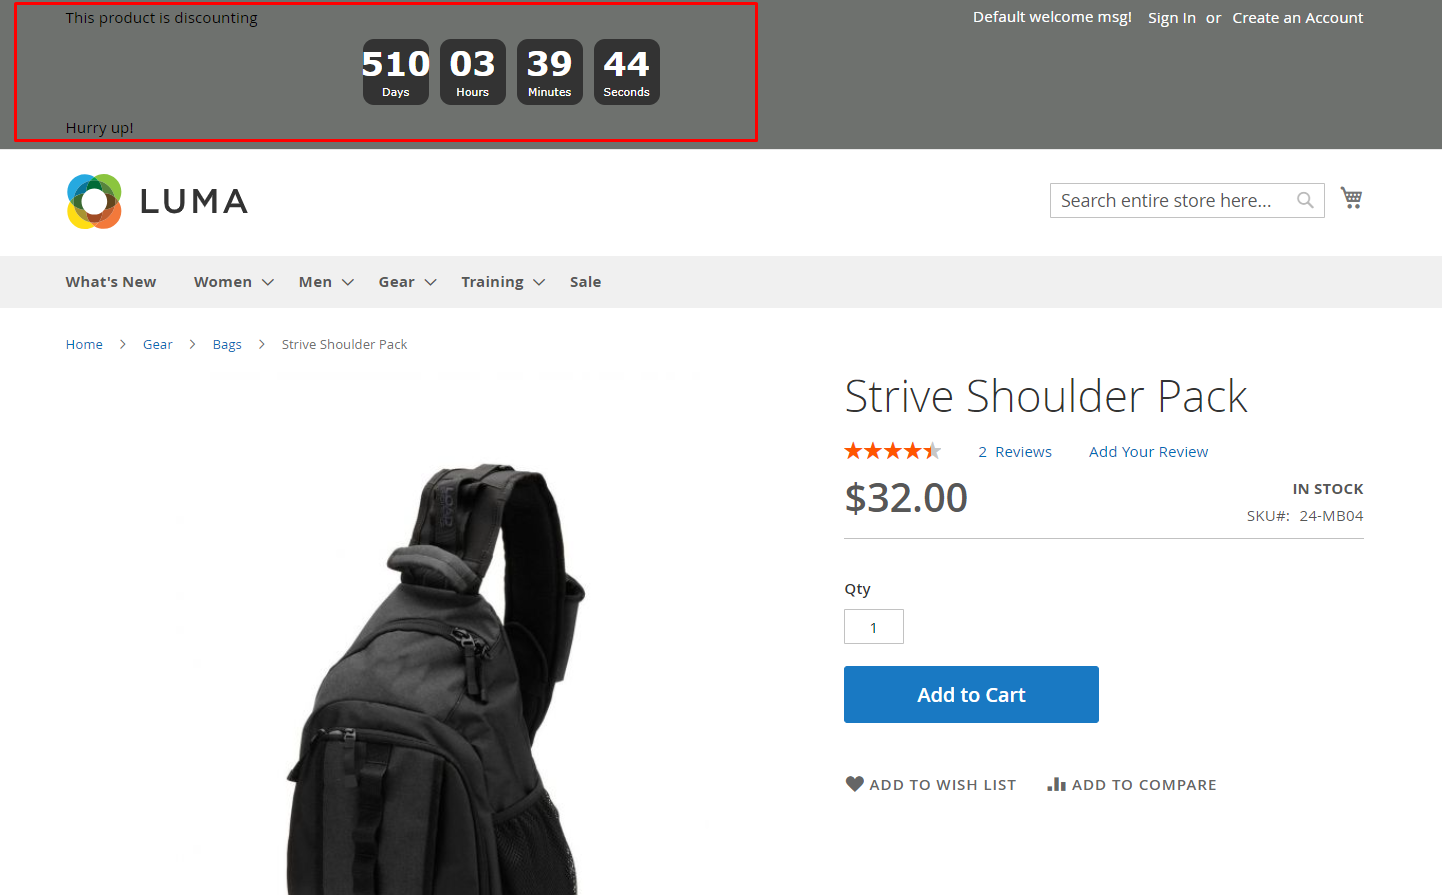 Countdown timer at product page